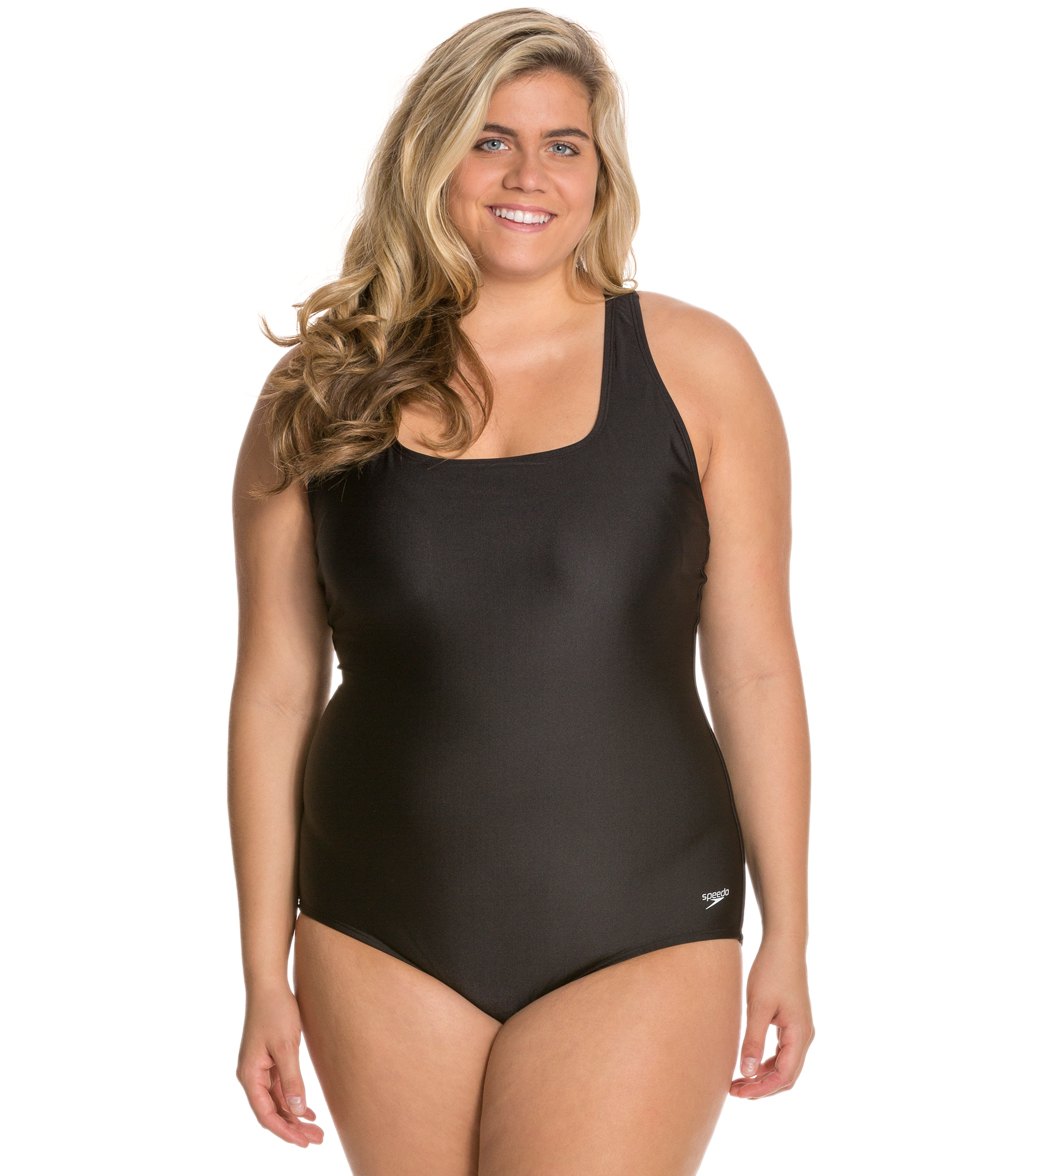 Thick Thighs Save Lives One Piece Swimsuit Plus Size. Black / Pink